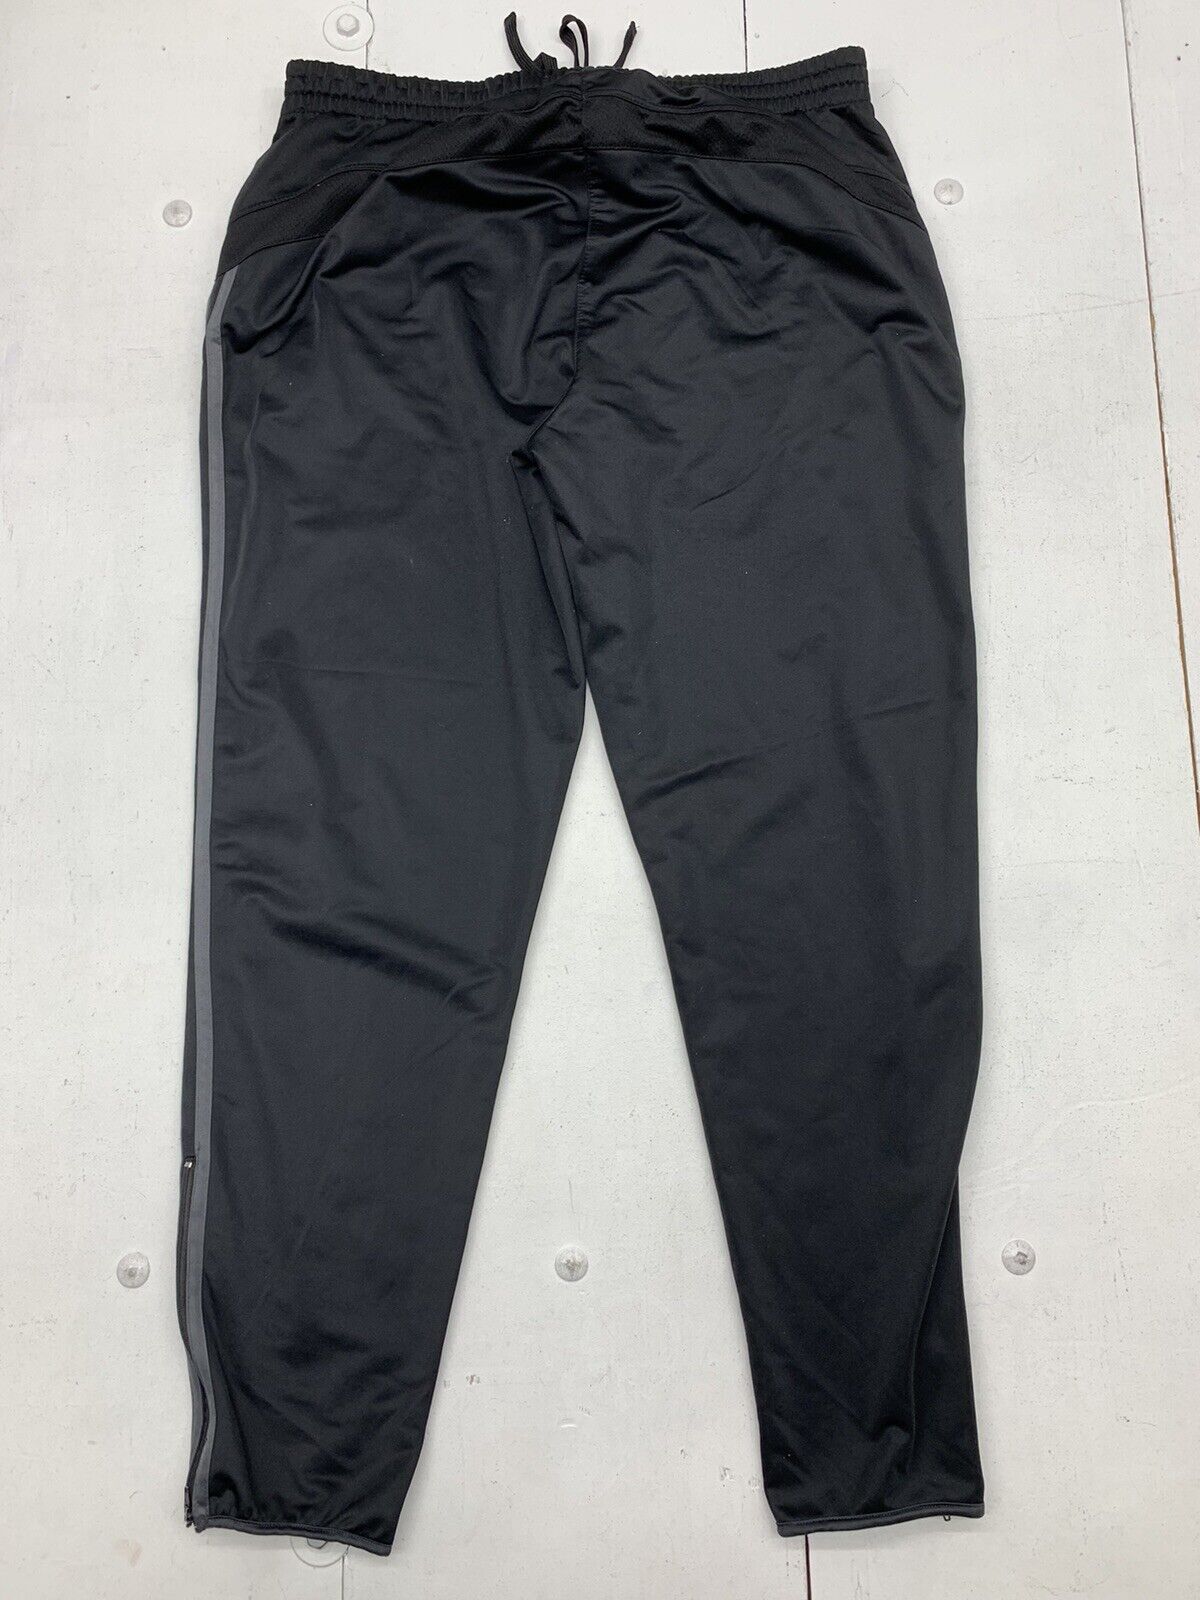 Athletic Leggings By Avia Size: Xl